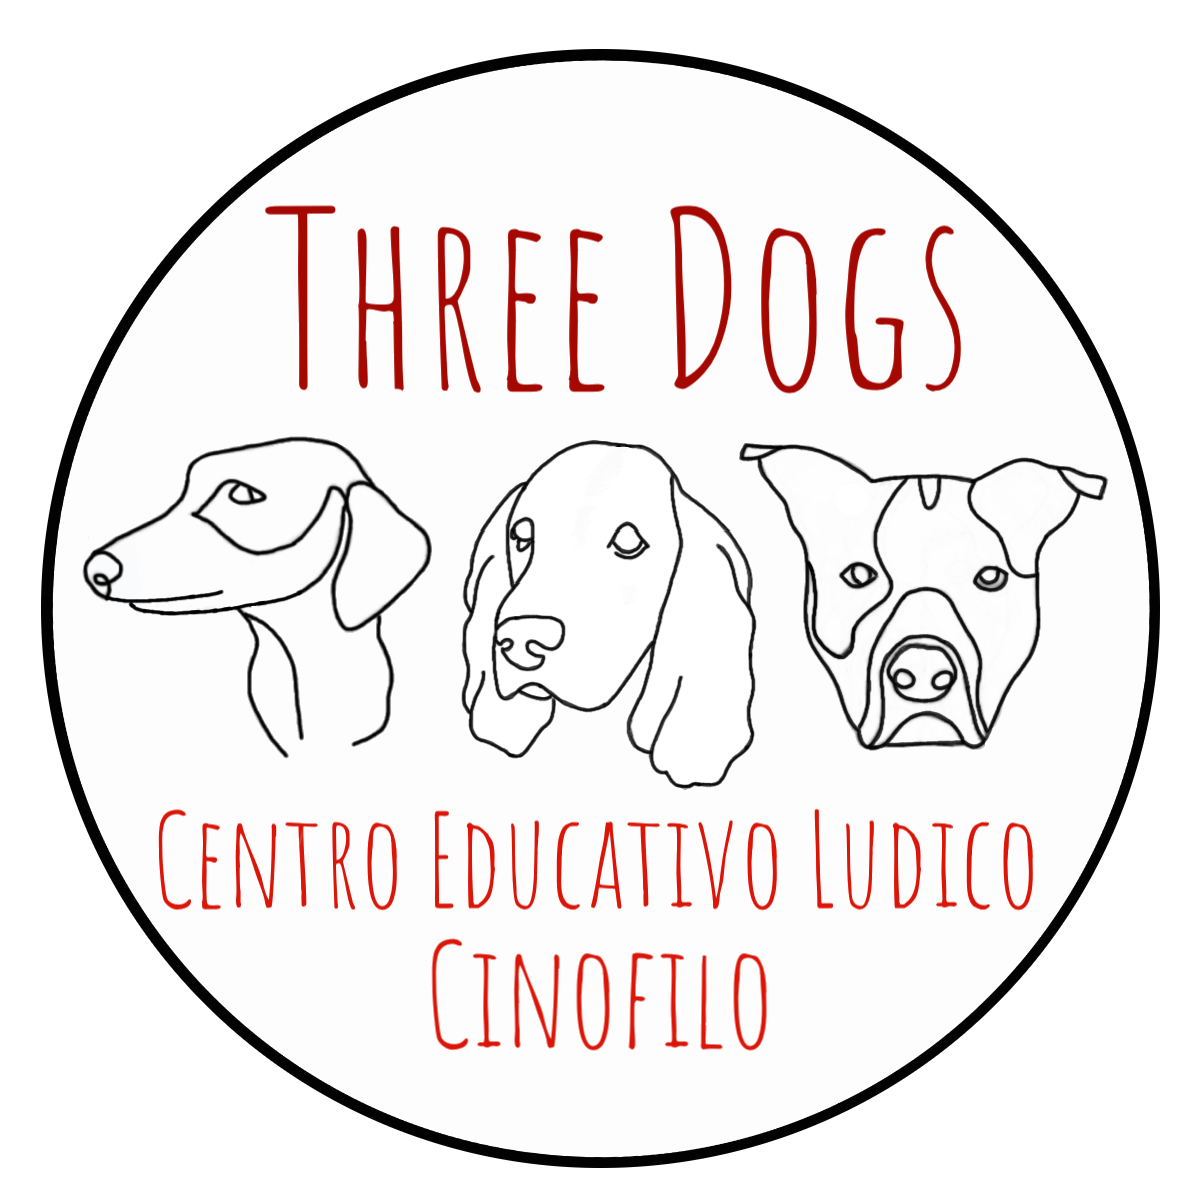 THREE DOGS A.S.D.